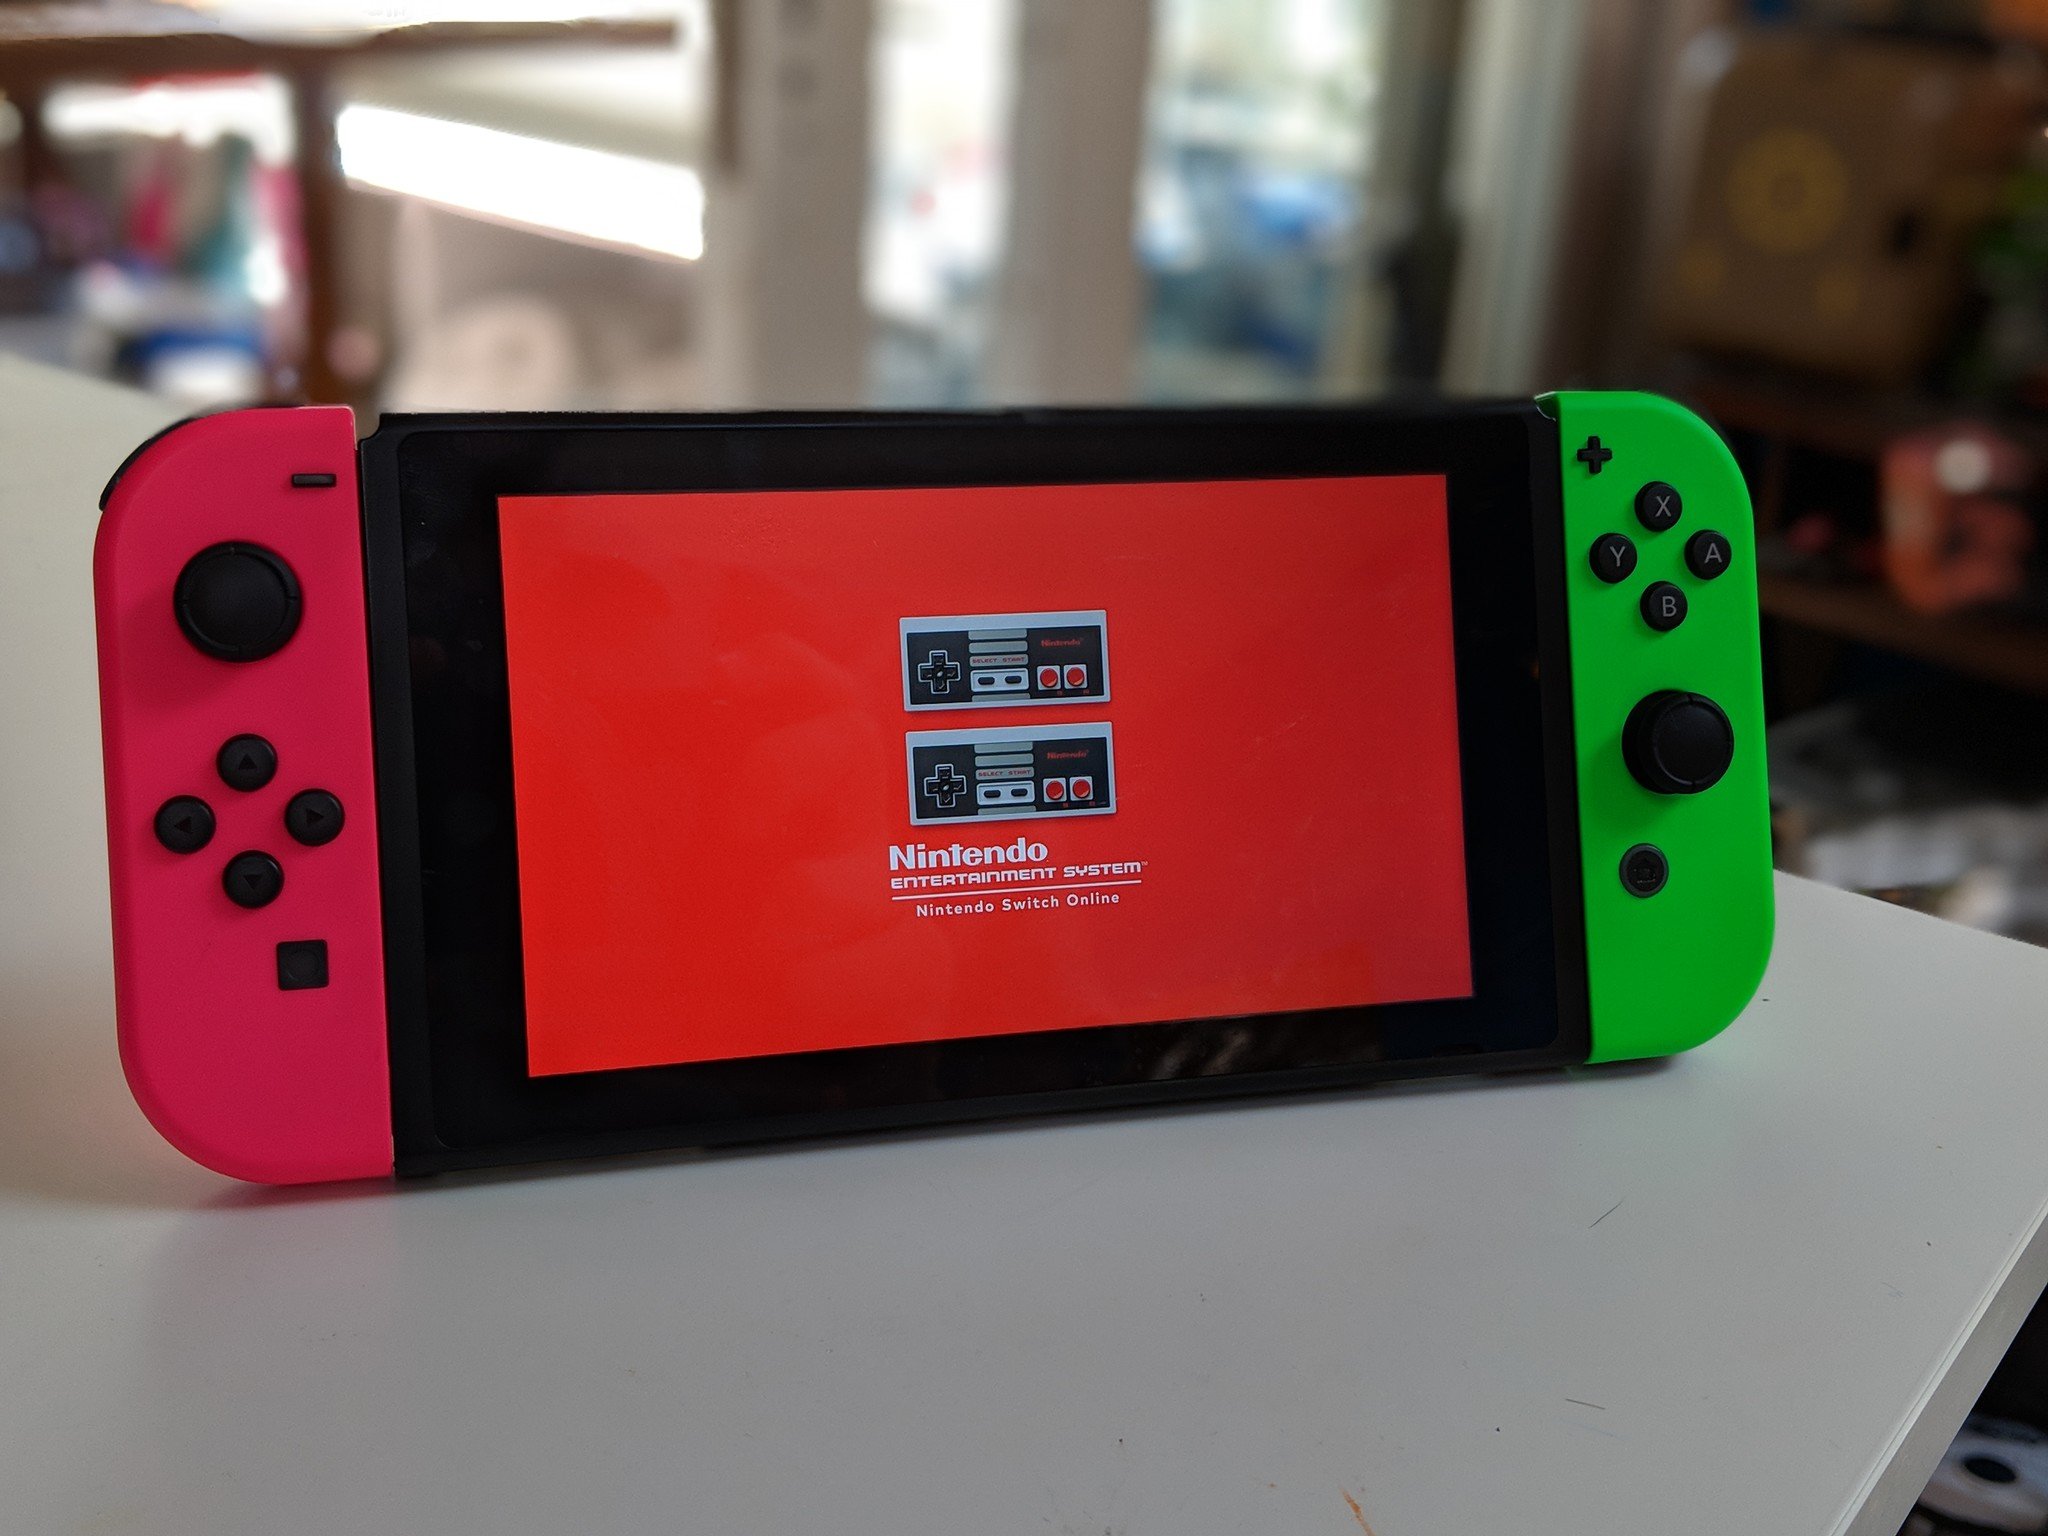 Bouton Groupe familial Nintendo Switch Online